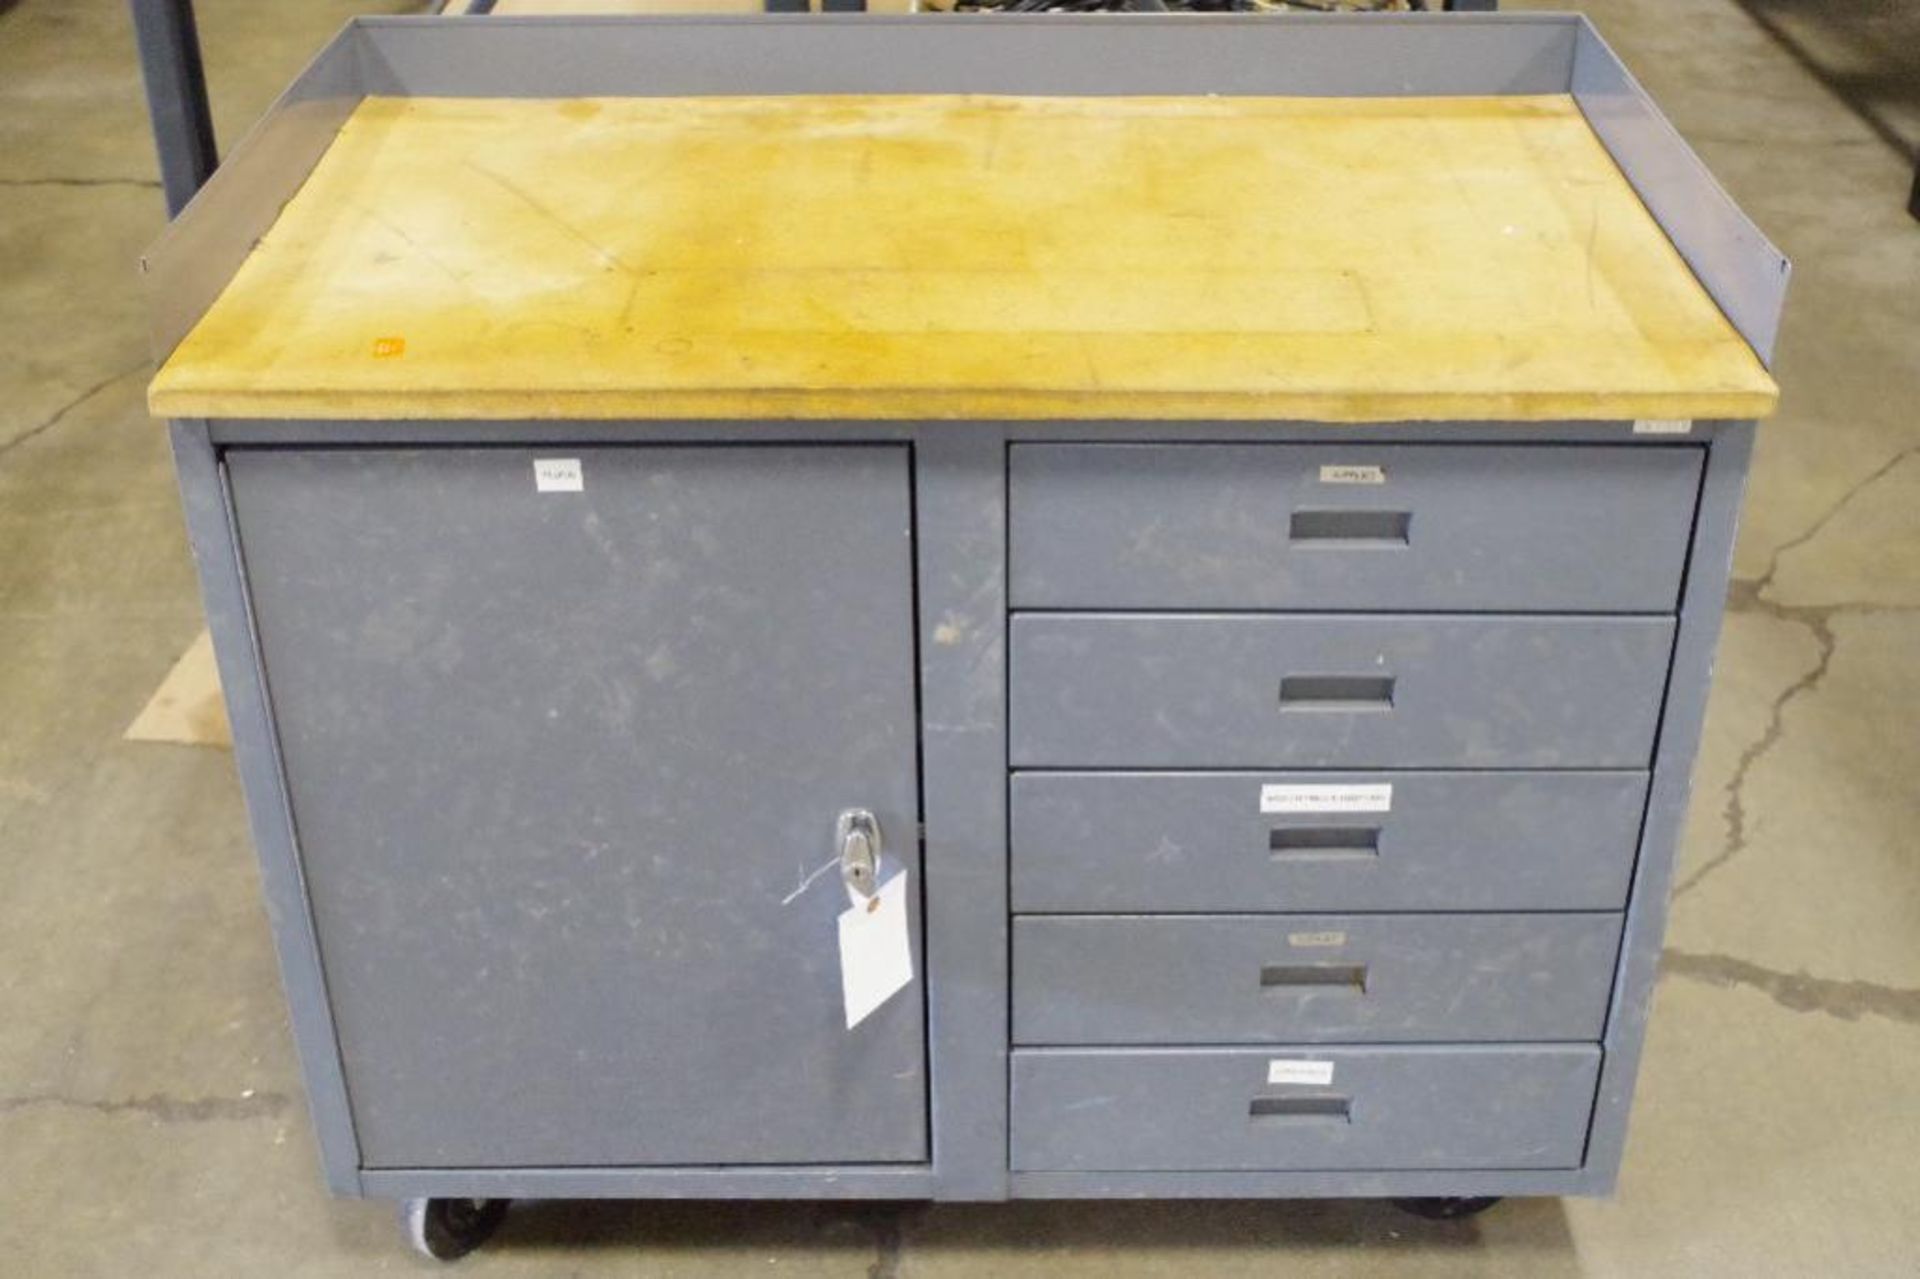 Rolling Metal Shop Desk w/ Cabinet, 5-Drawers (NO Key for Cabinet Handle) - Image 3 of 4